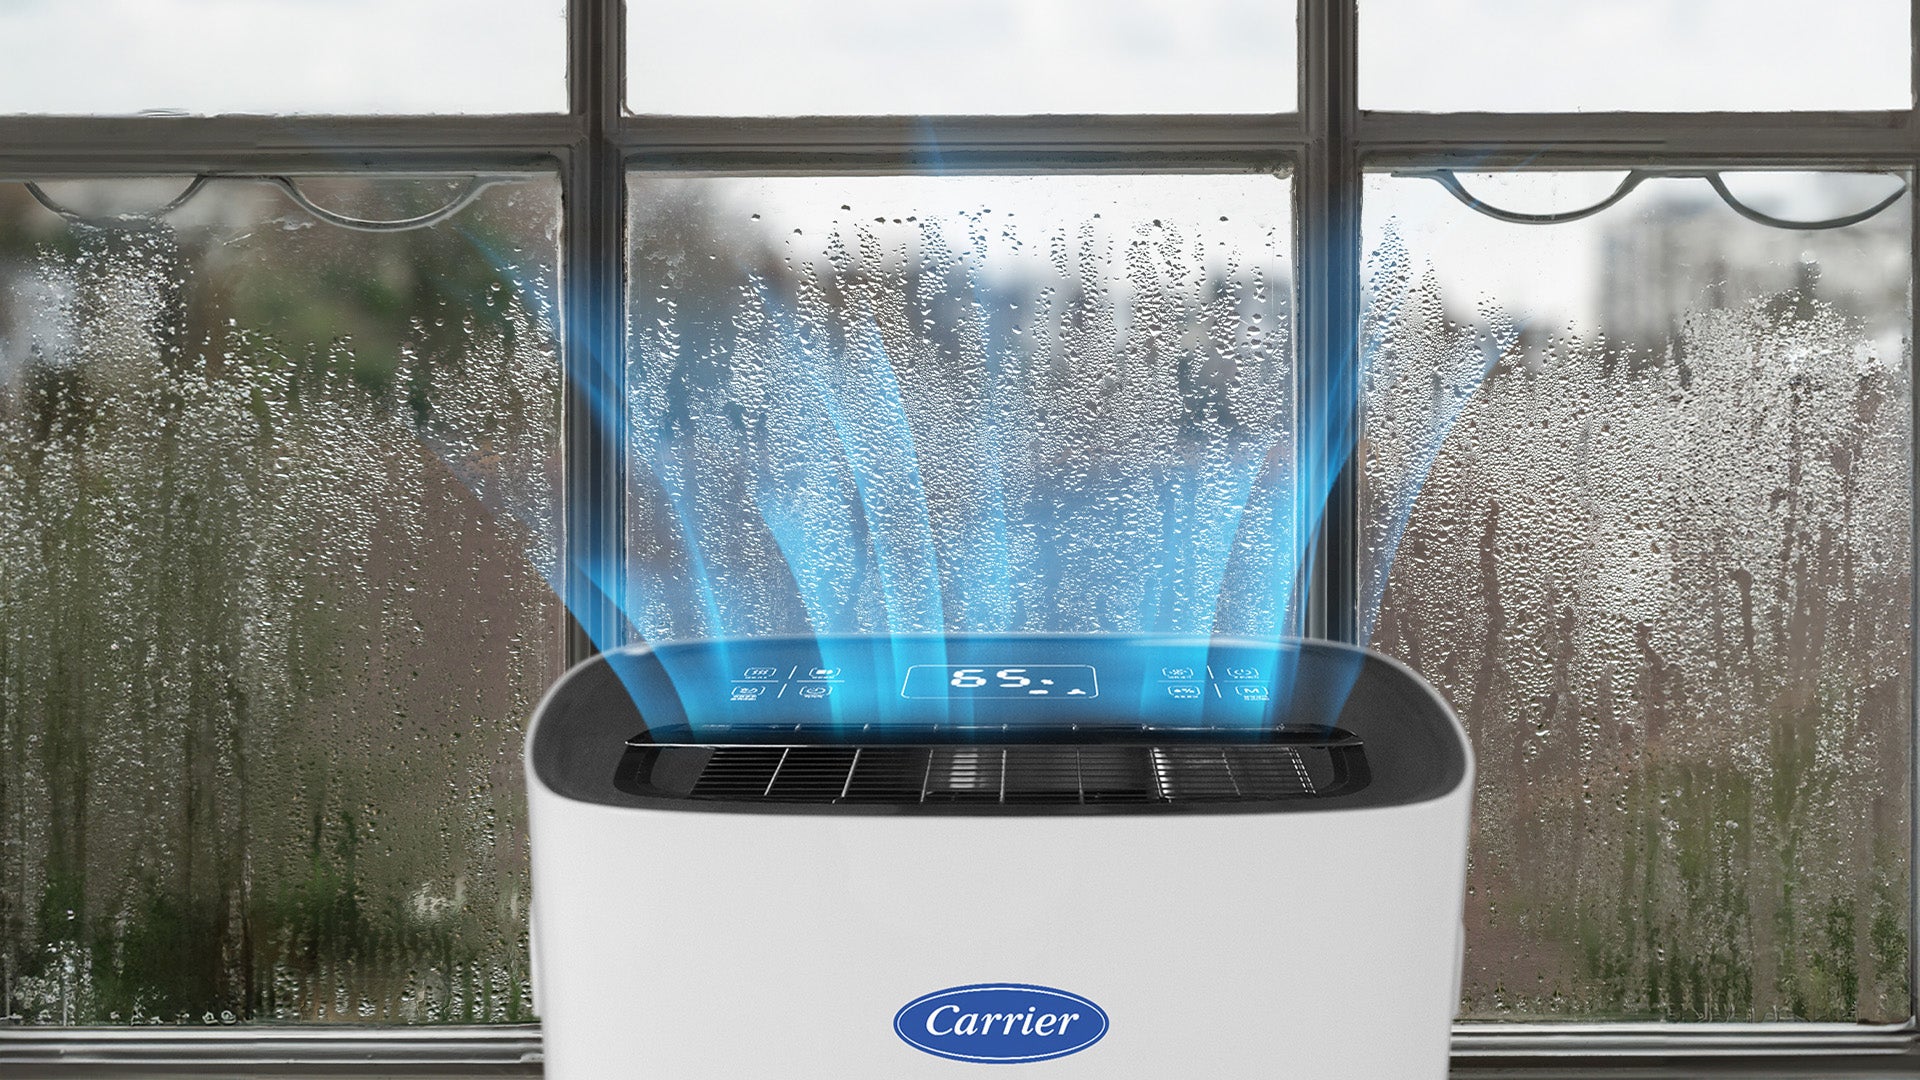 https://concepstore.ph/collections/carrier/products/carrier-dehumidifier-30l